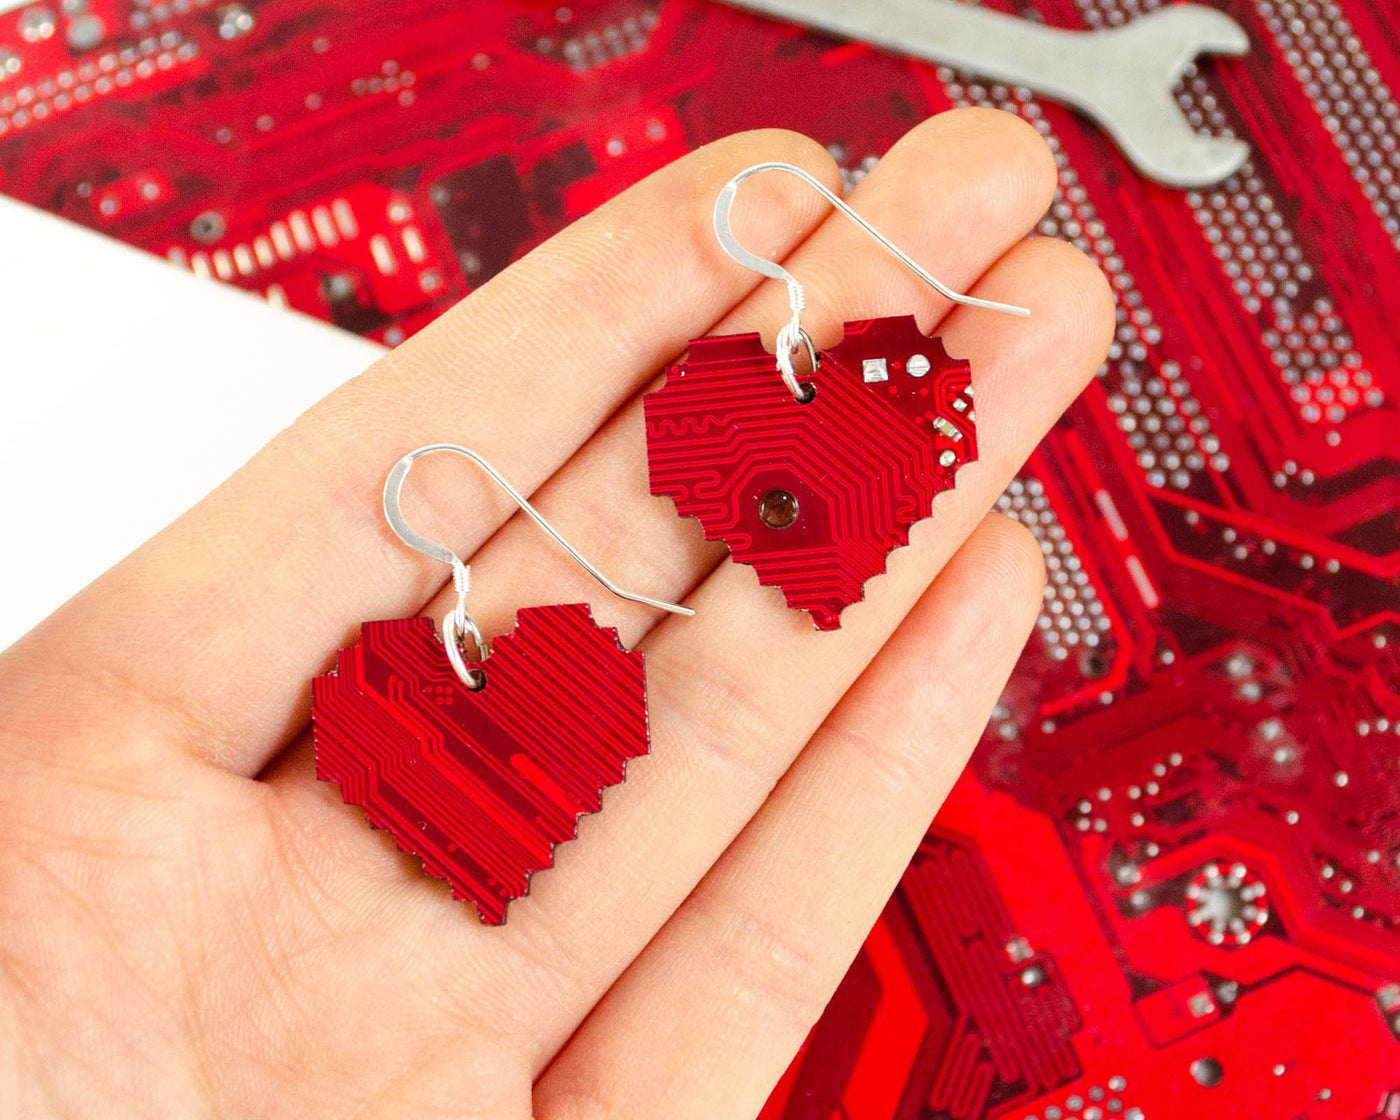 Red Circuit Board Pixelated Heart Earrings, Valentines Day Gift, Gamer Gift, Unique Heart Jewelry